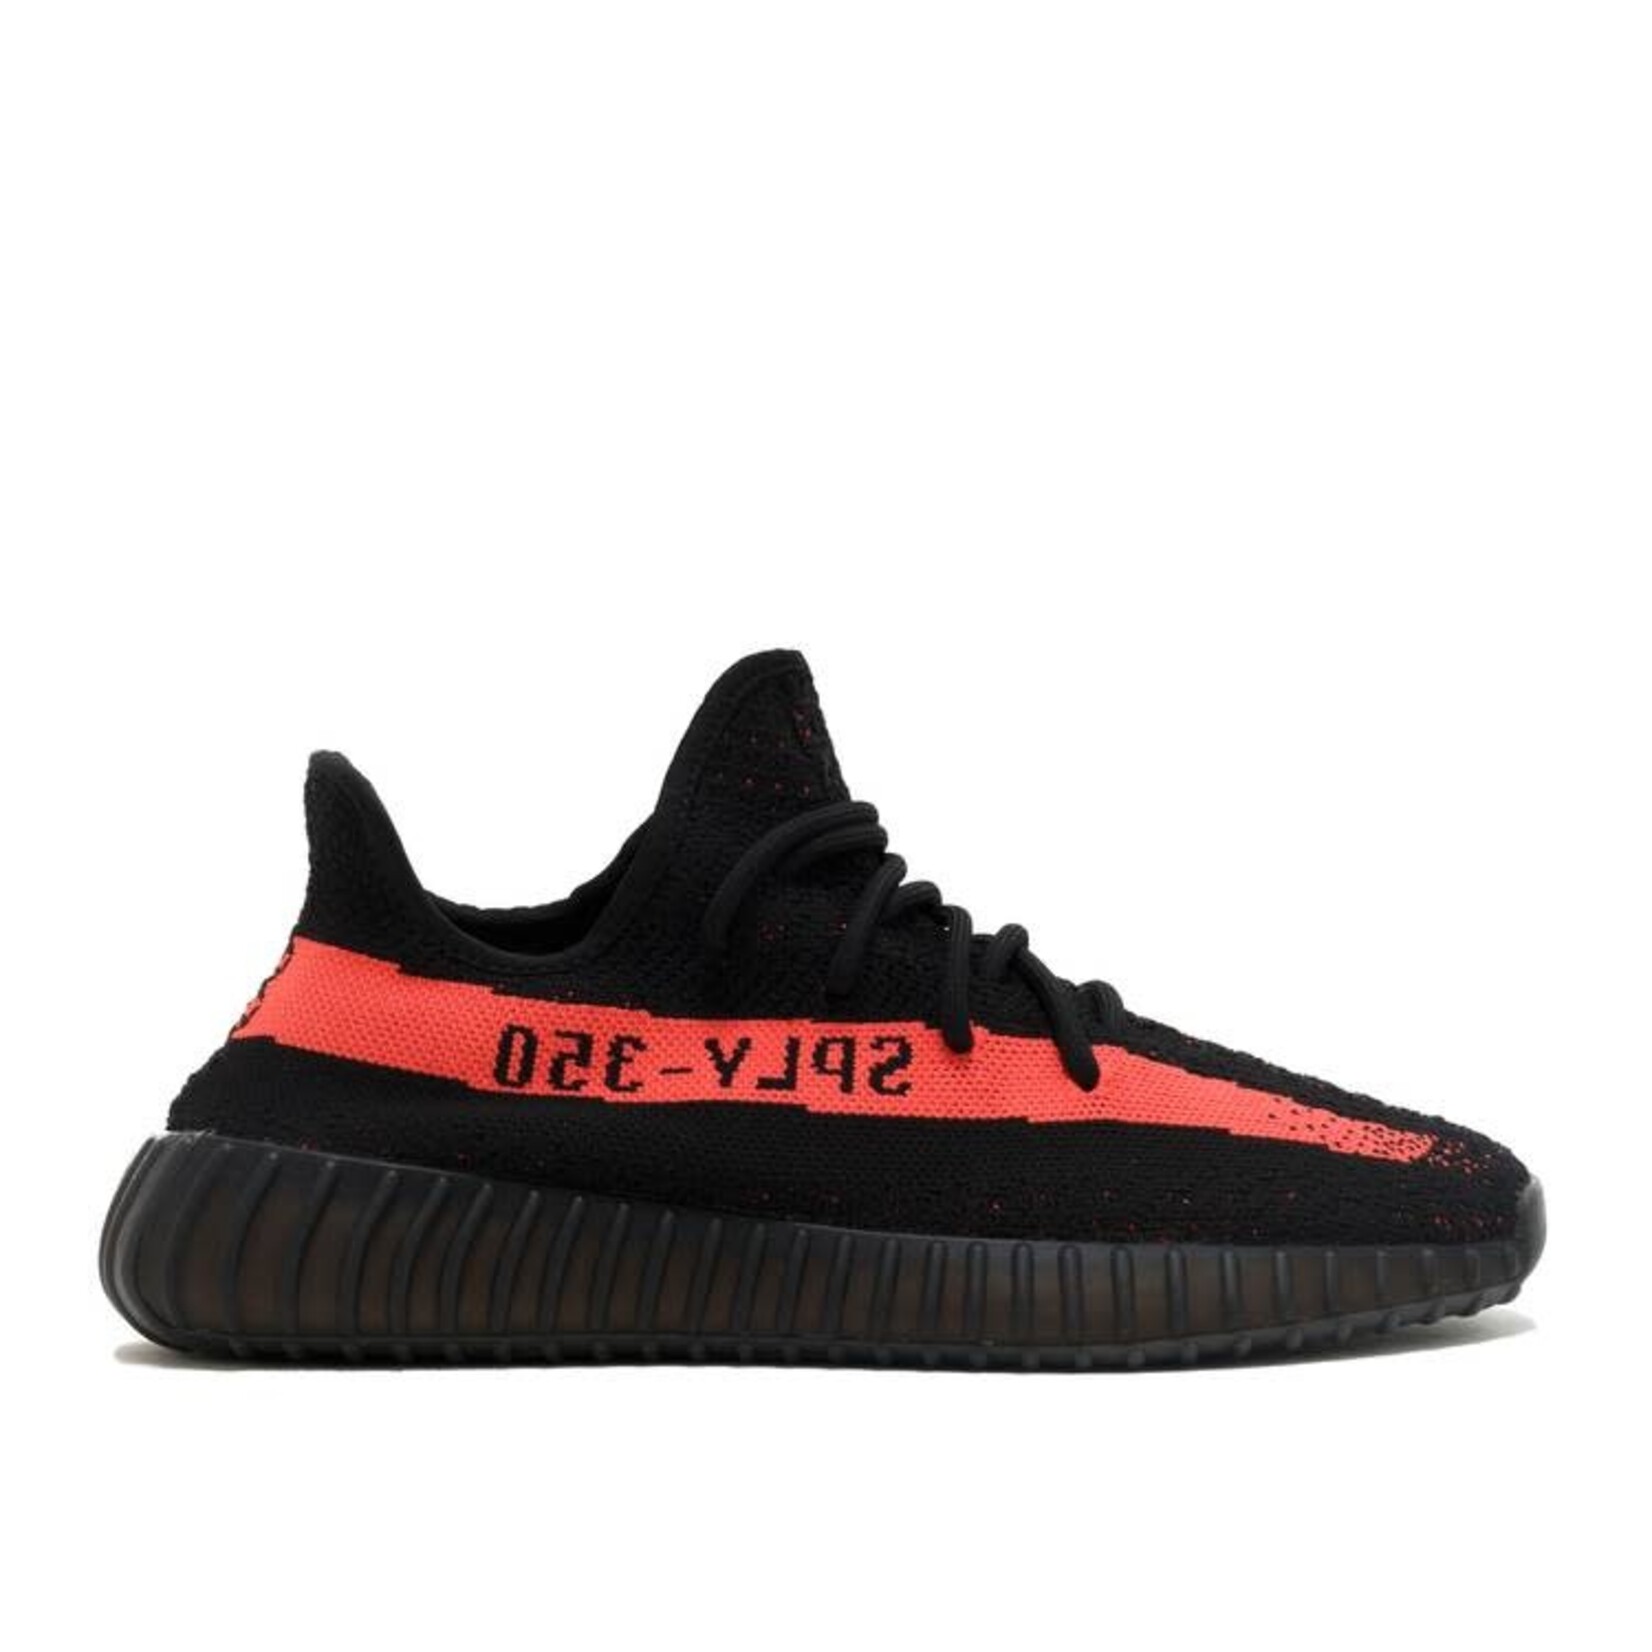 Adidas adidas Yeezy Boost 350 V2 Core Black Red (2016/2022/2023) Size 9, DS BRAND NEW